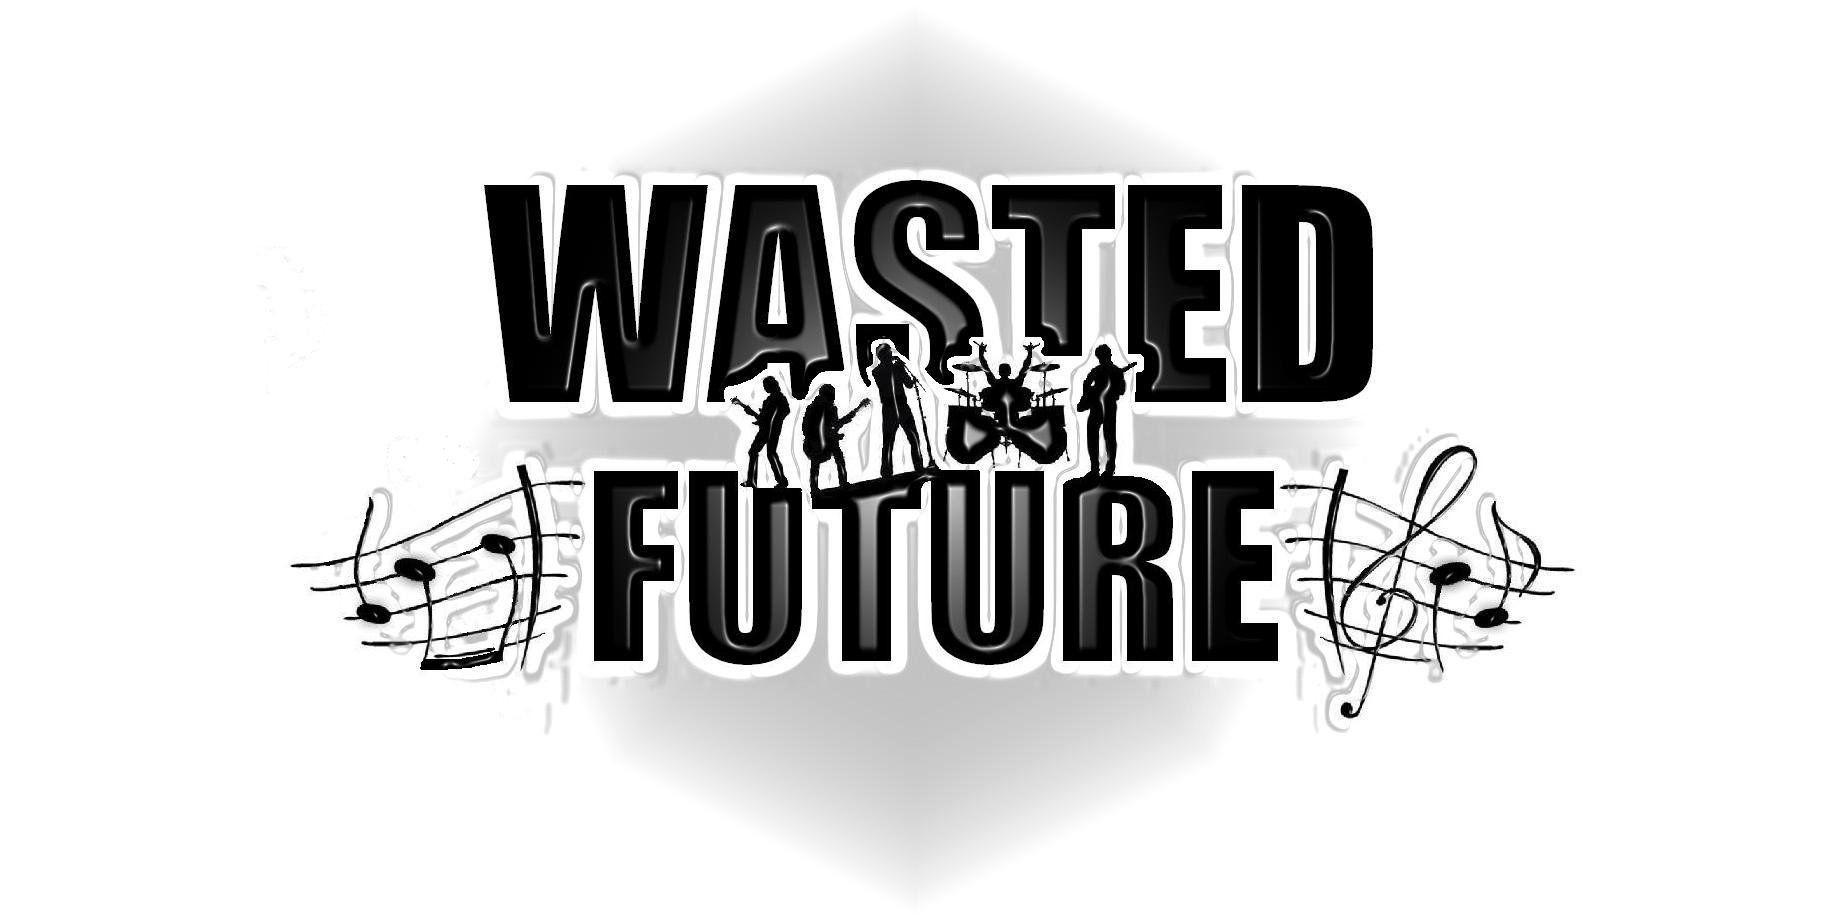 Wasted Future